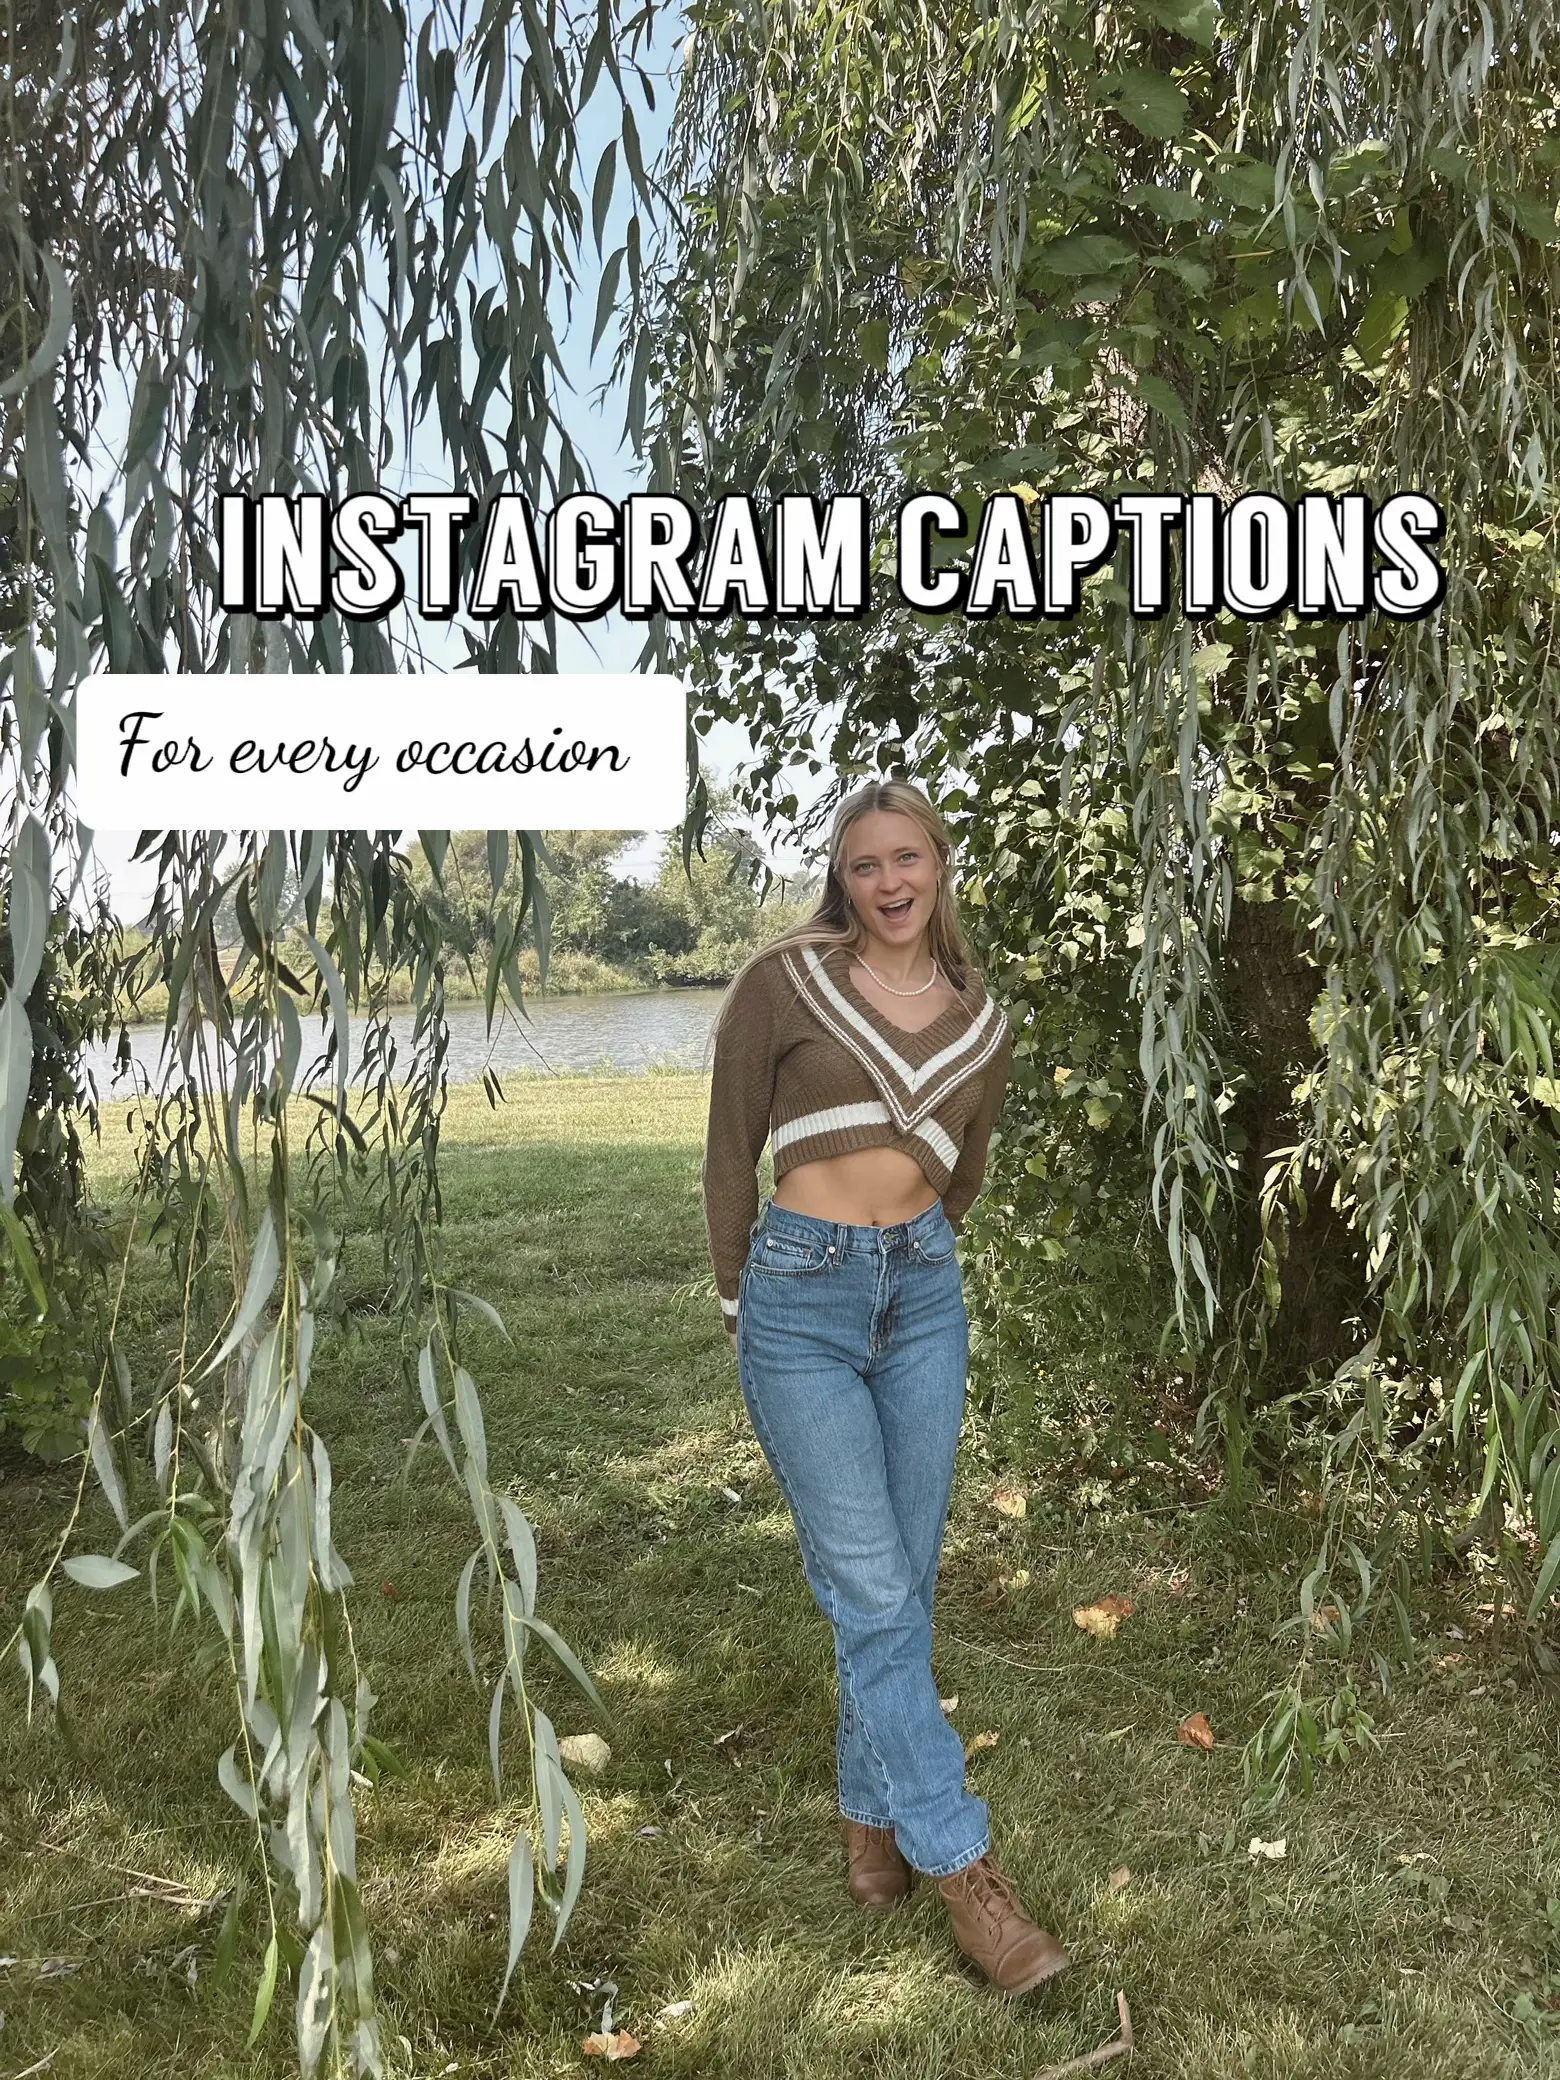 Instagram Captions; for every occasion 🥰's images